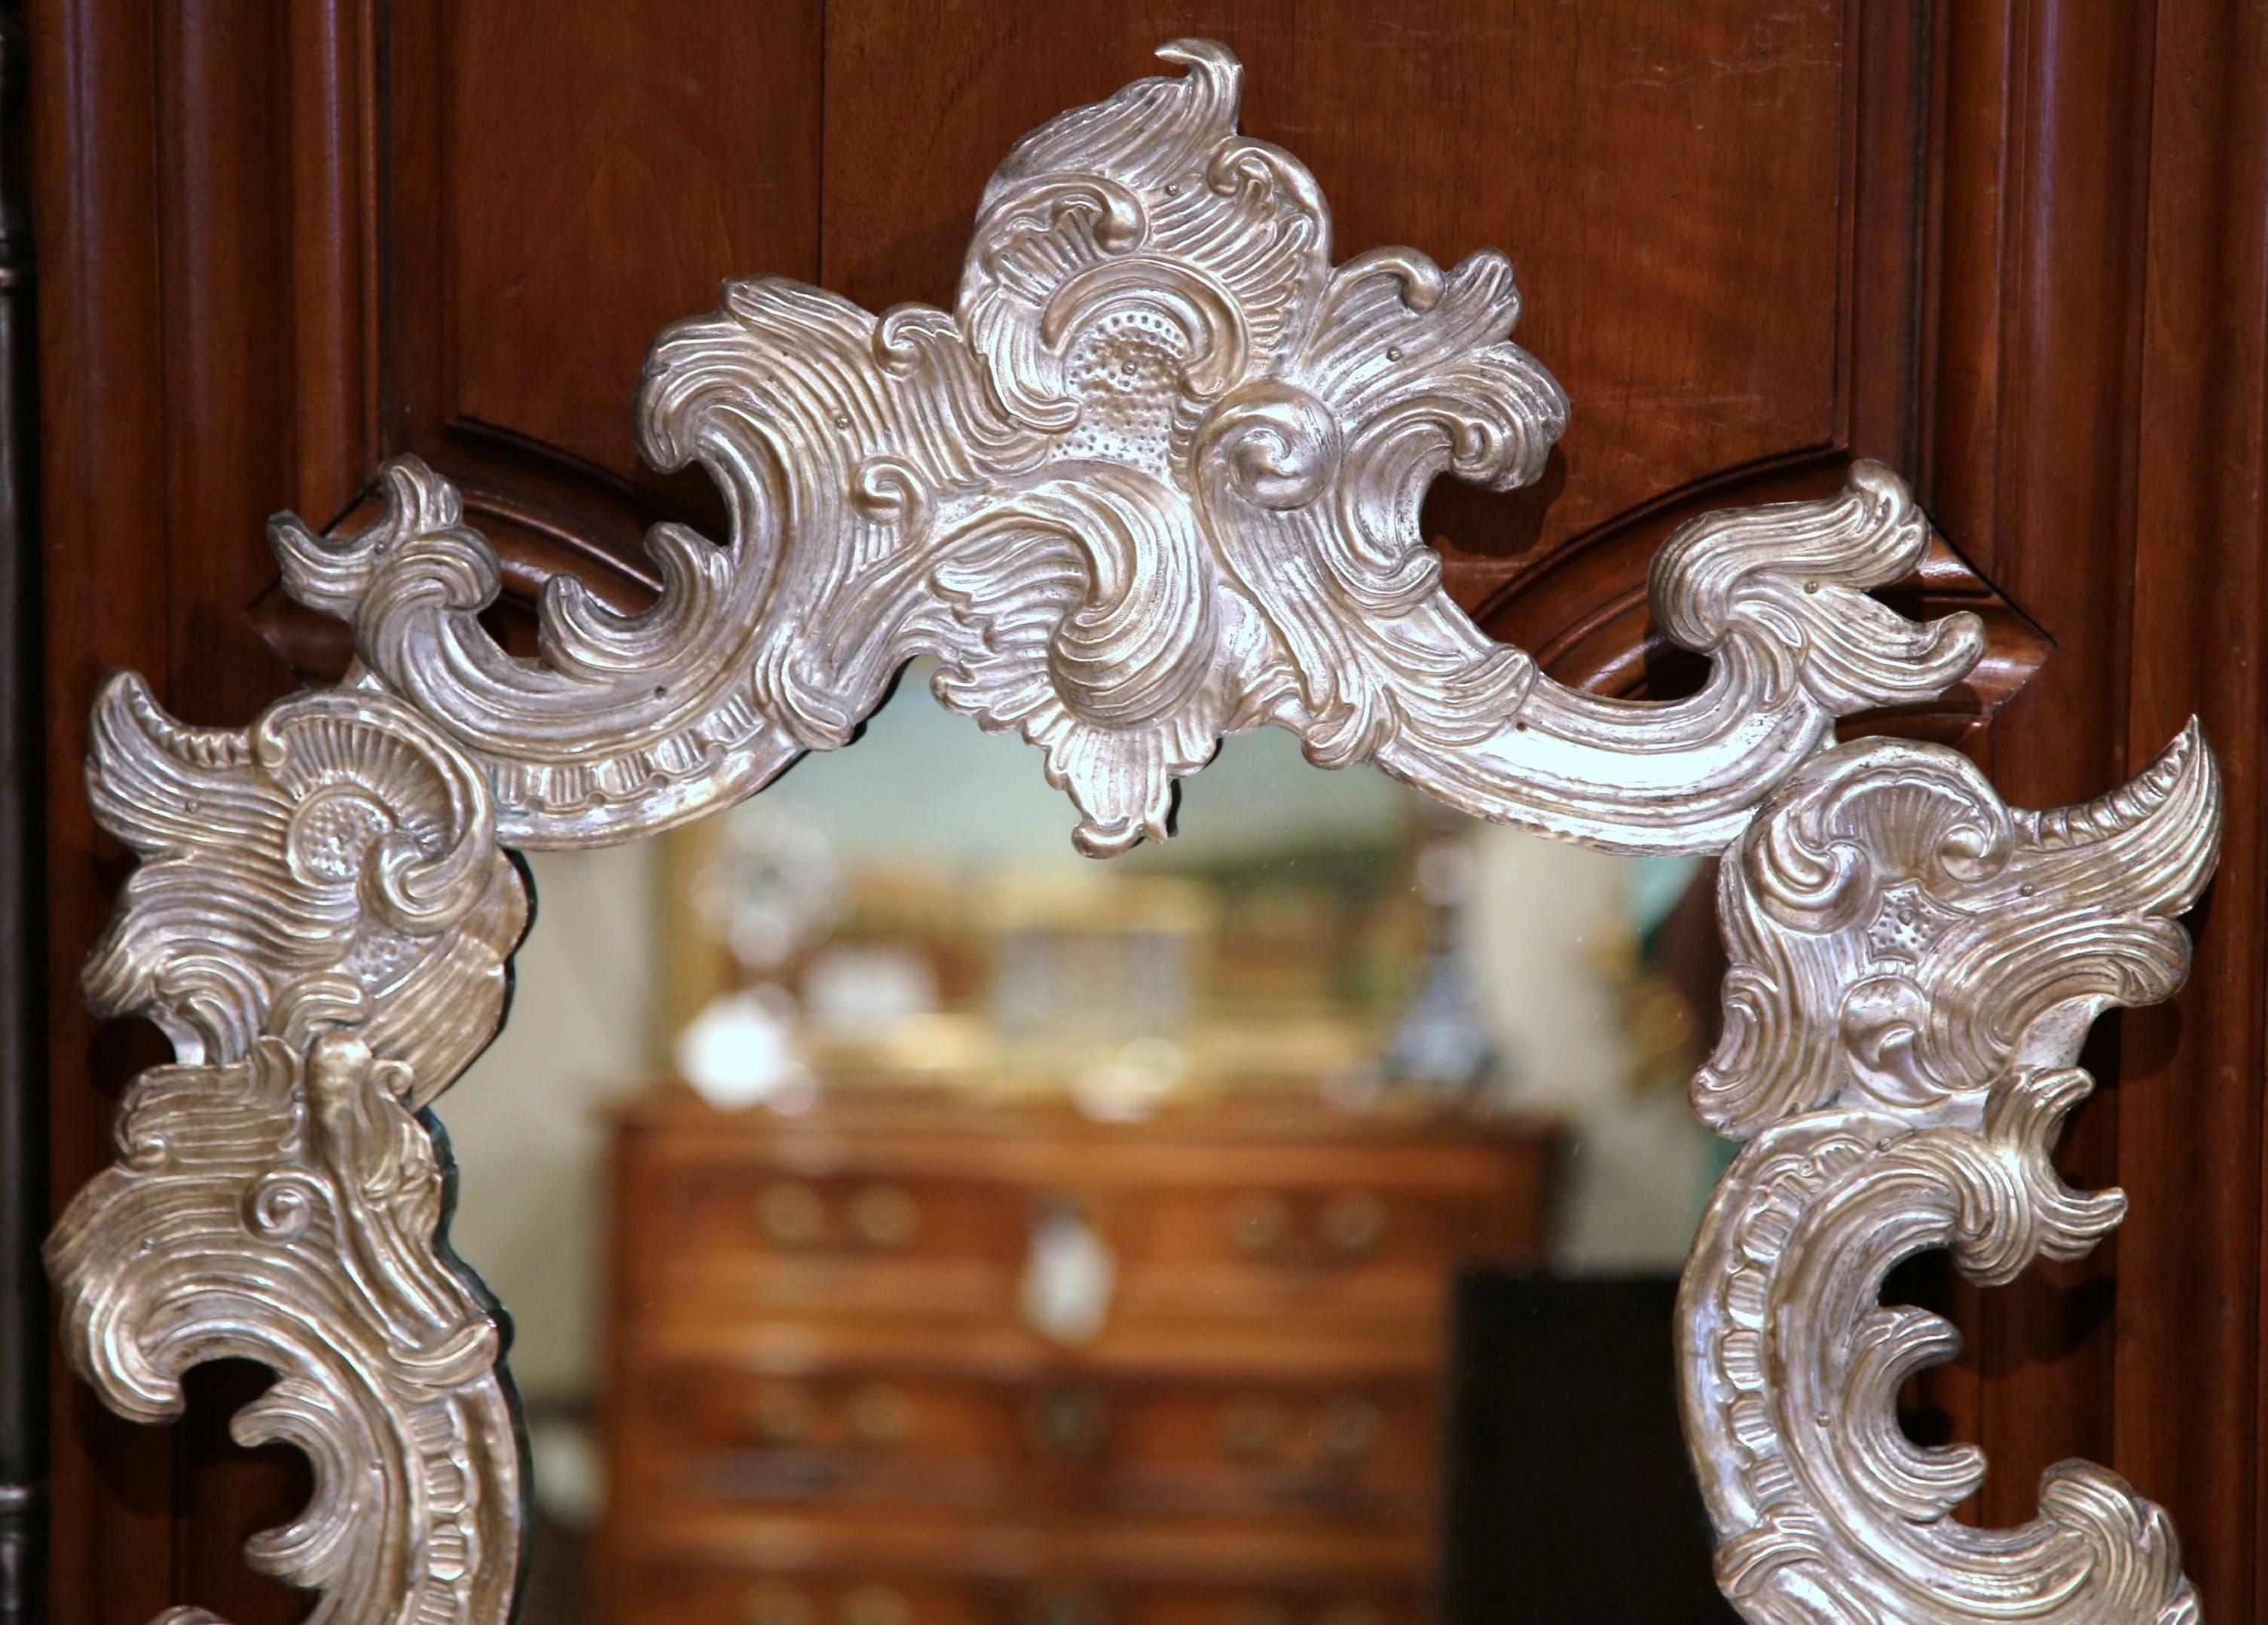 This elegant, antique table mirror was crafted in France circa 1860. The ornate, asymmetrical mirror in the rococo style features intricate copper repousse work with a large shell motif on top. The piece is in excellent condition with rich silver